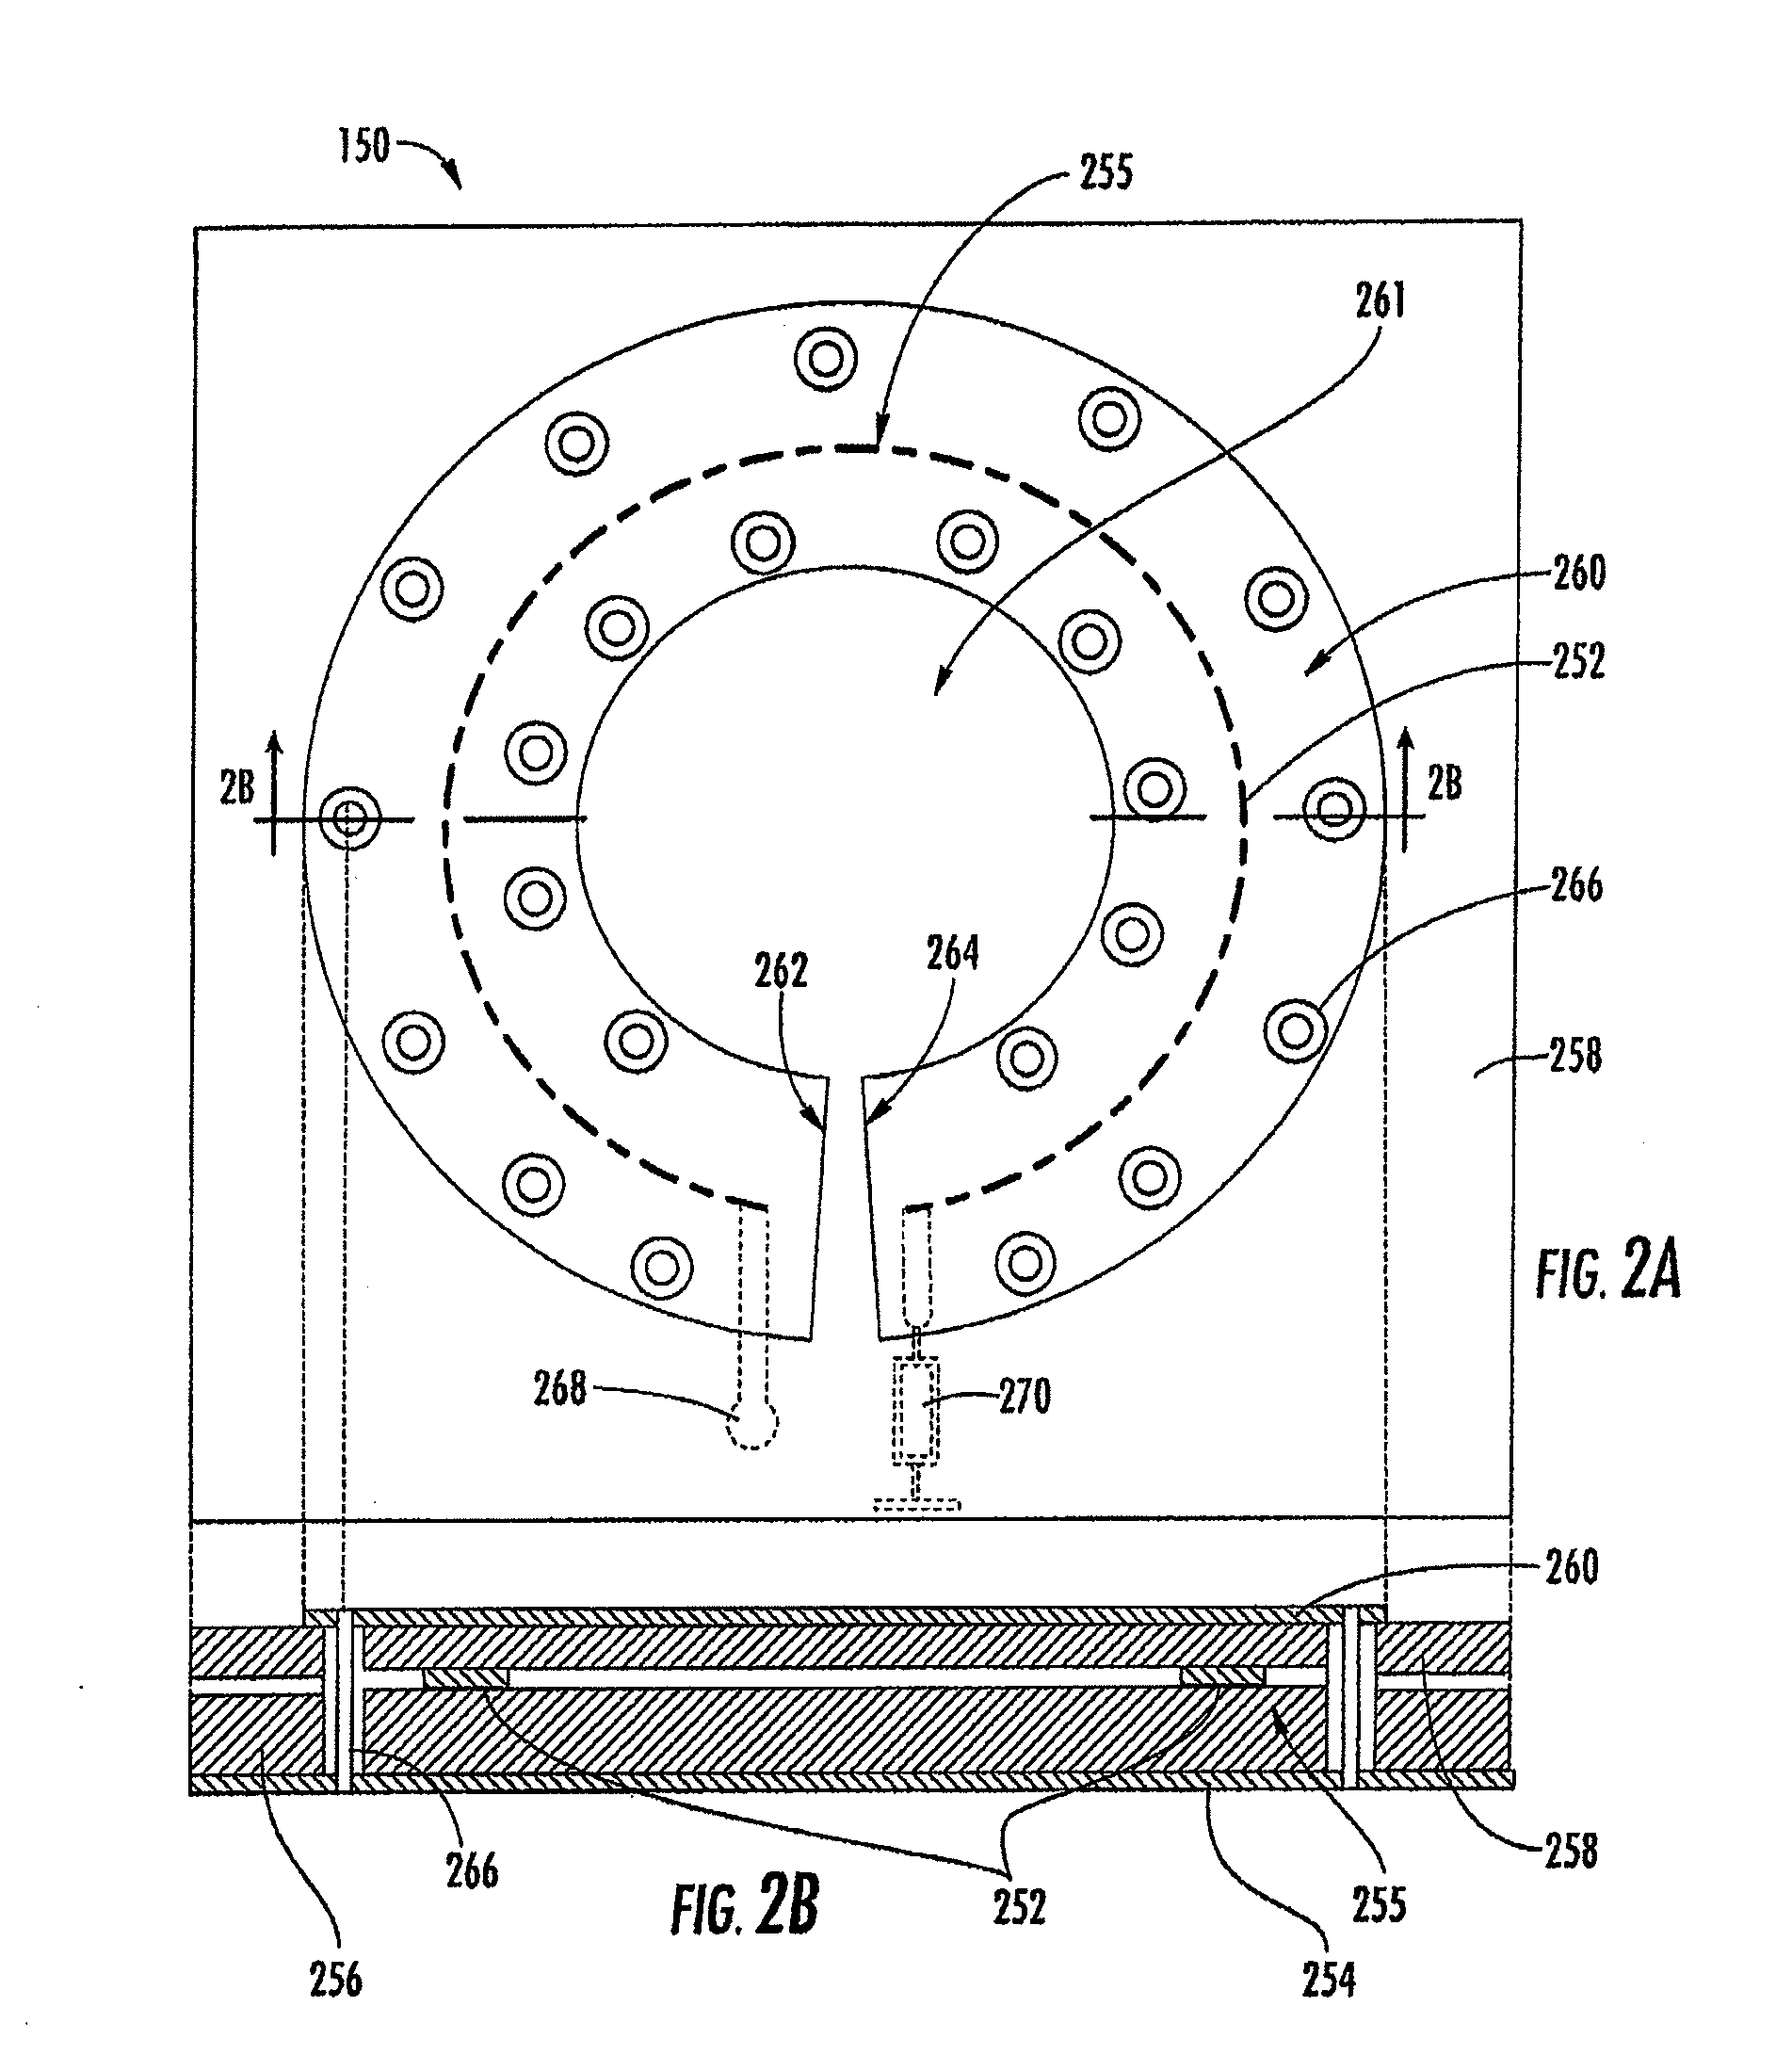 Encoding module, associated encoding element, connector, printer-encoder and access control system